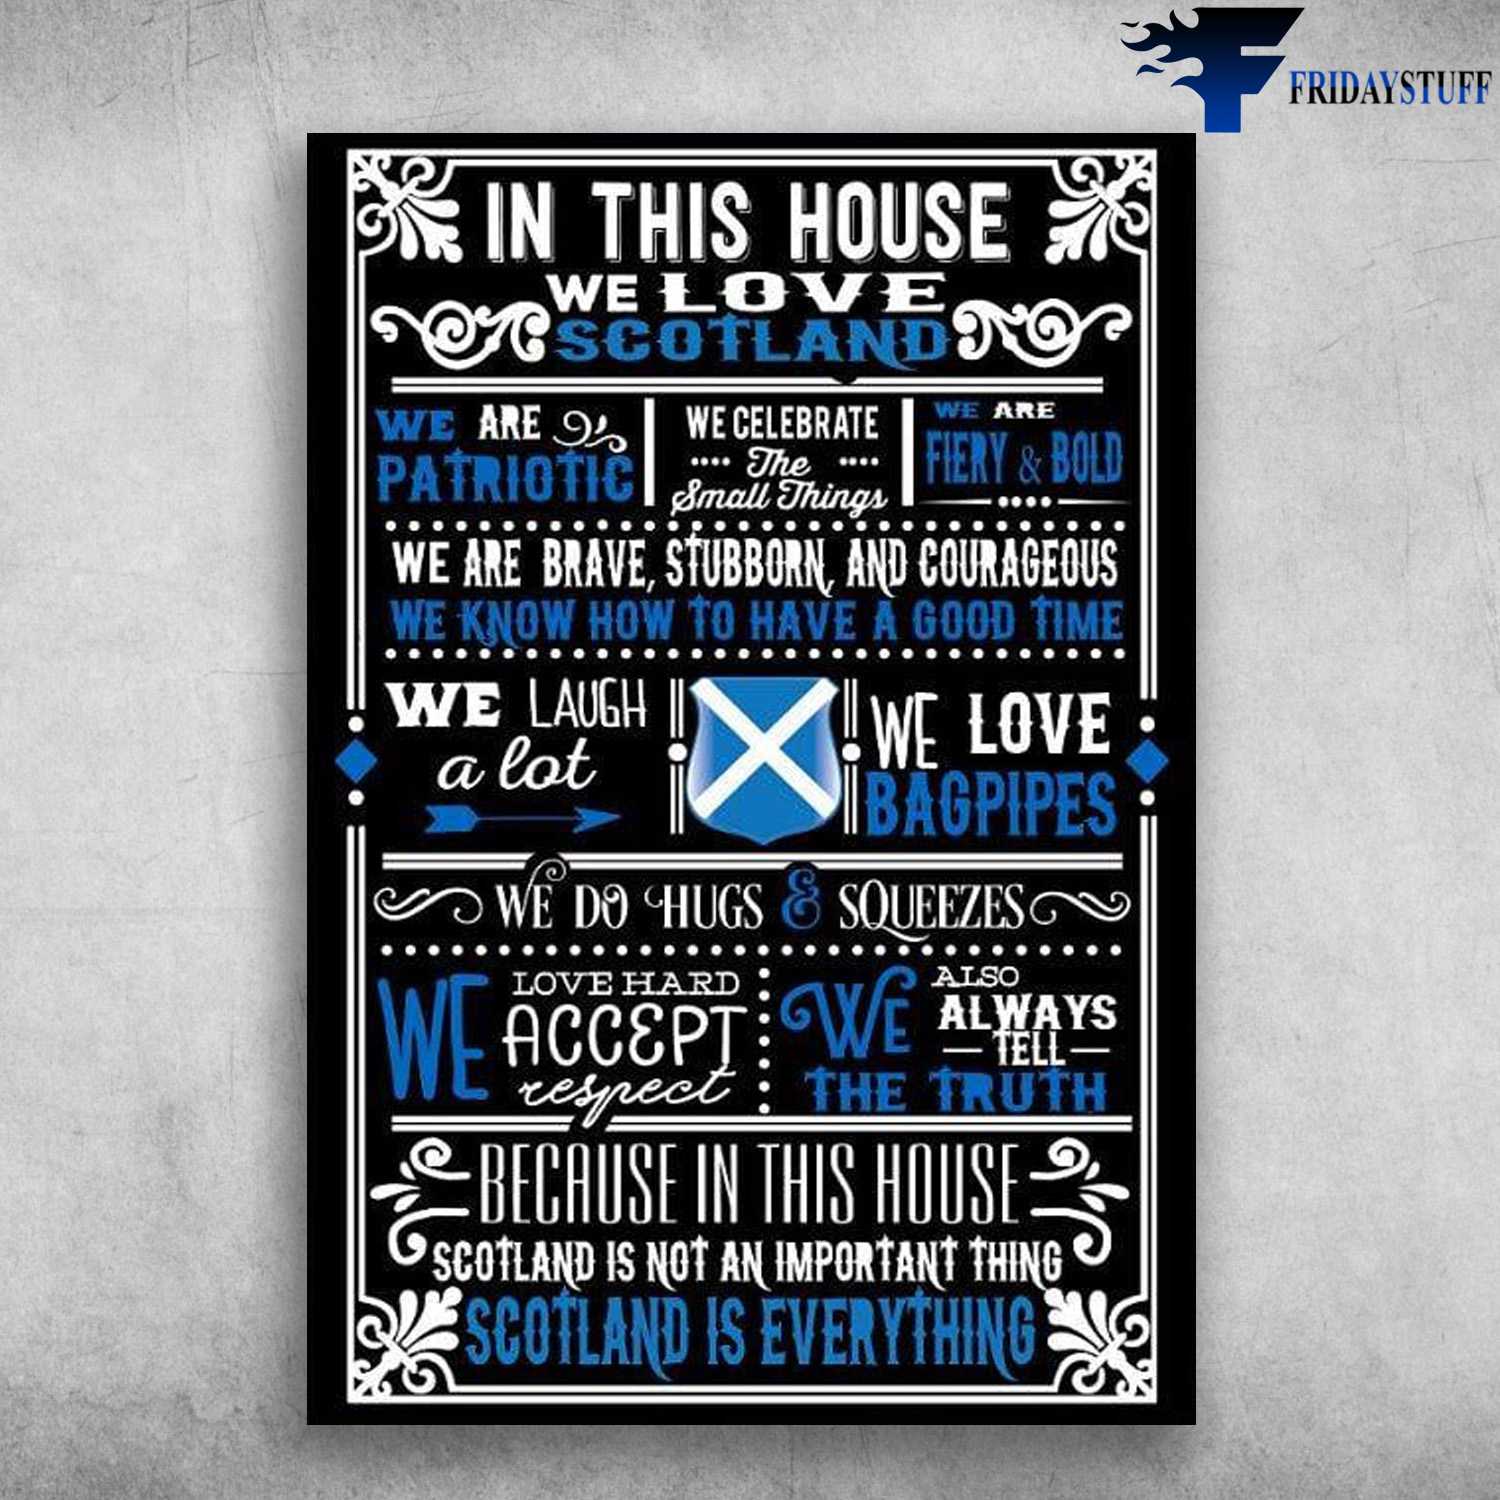 Scotland Family - In This House, We Love Scotland, We Are Patriotic, We Celebrate, The Small Things, We Are Fiery And Bold, We Are Brave, Stubborn, And Courageous, We Know How To Have